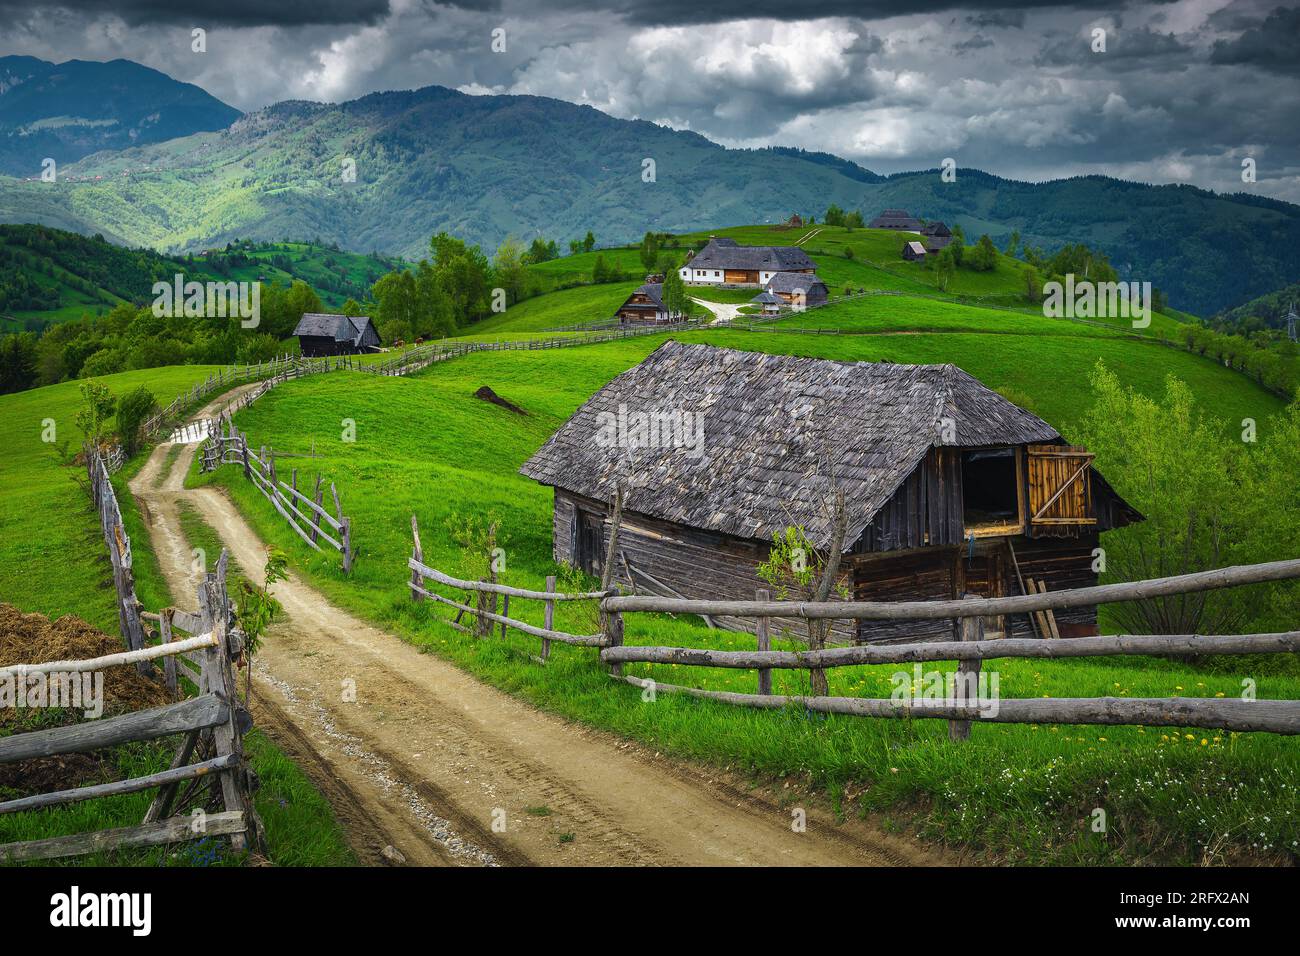 Green pastures and gardens with wooden barns on the hills, Transylvania, Romania, Europe Stock Photo